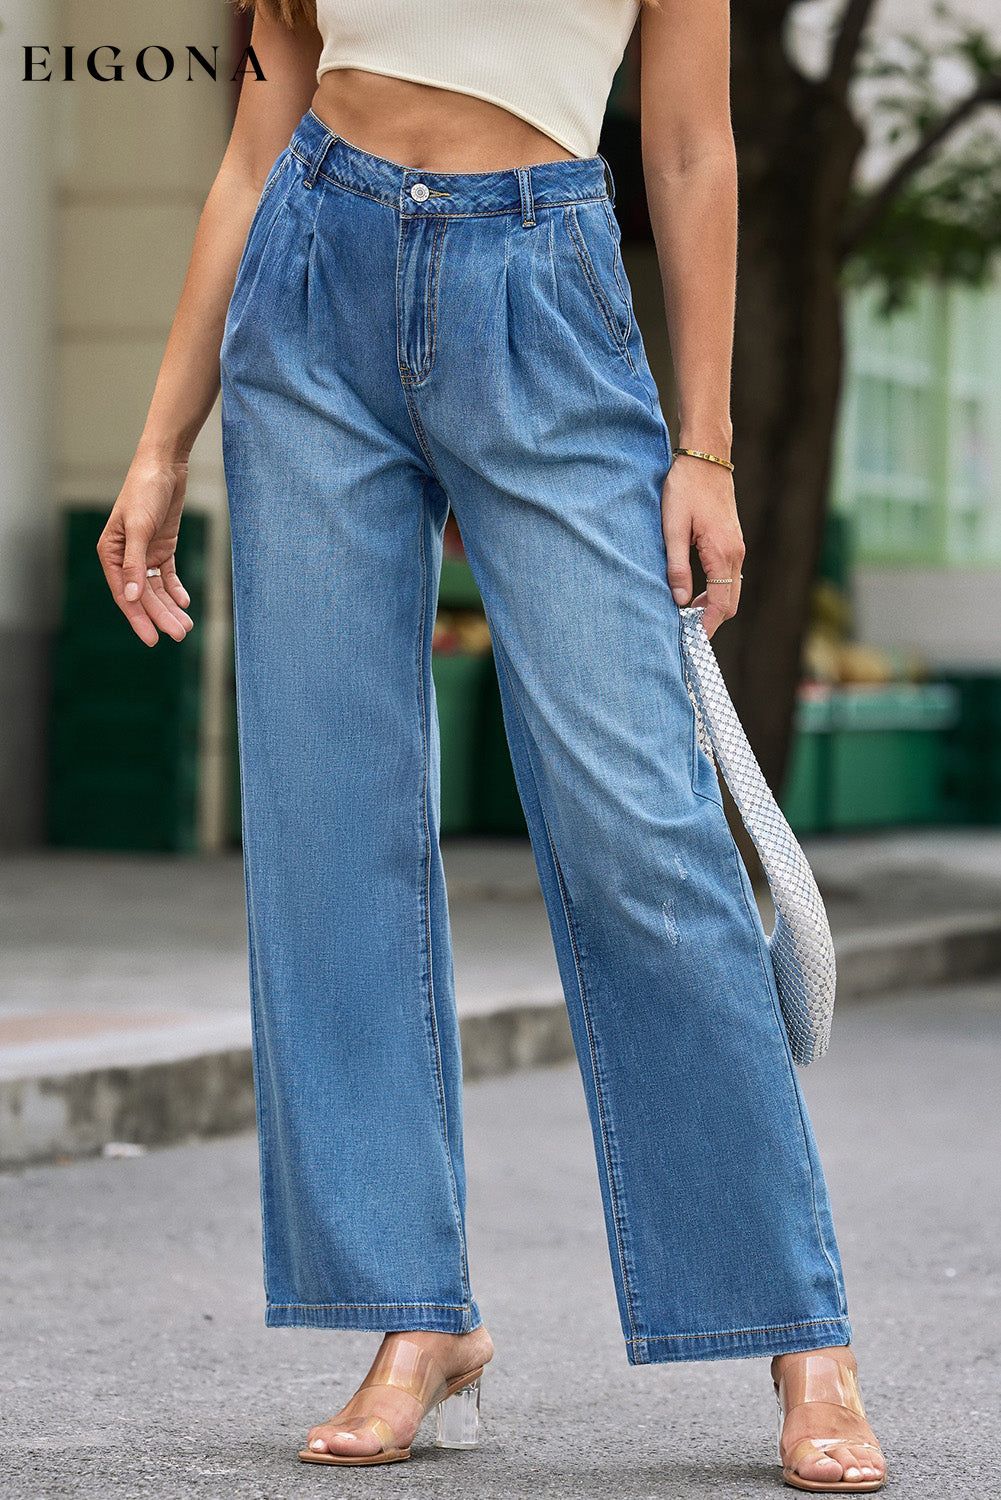 Blue Slouchy Wide Leg Jeans All In Stock bottoms clothes DL Exclusive Fabric Denim Jeans Occasion Daily Occasion Office Print Solid Color Season Summer Silhouette Wide Leg Style Casual Style Modern wide leg pants Women's Bottoms